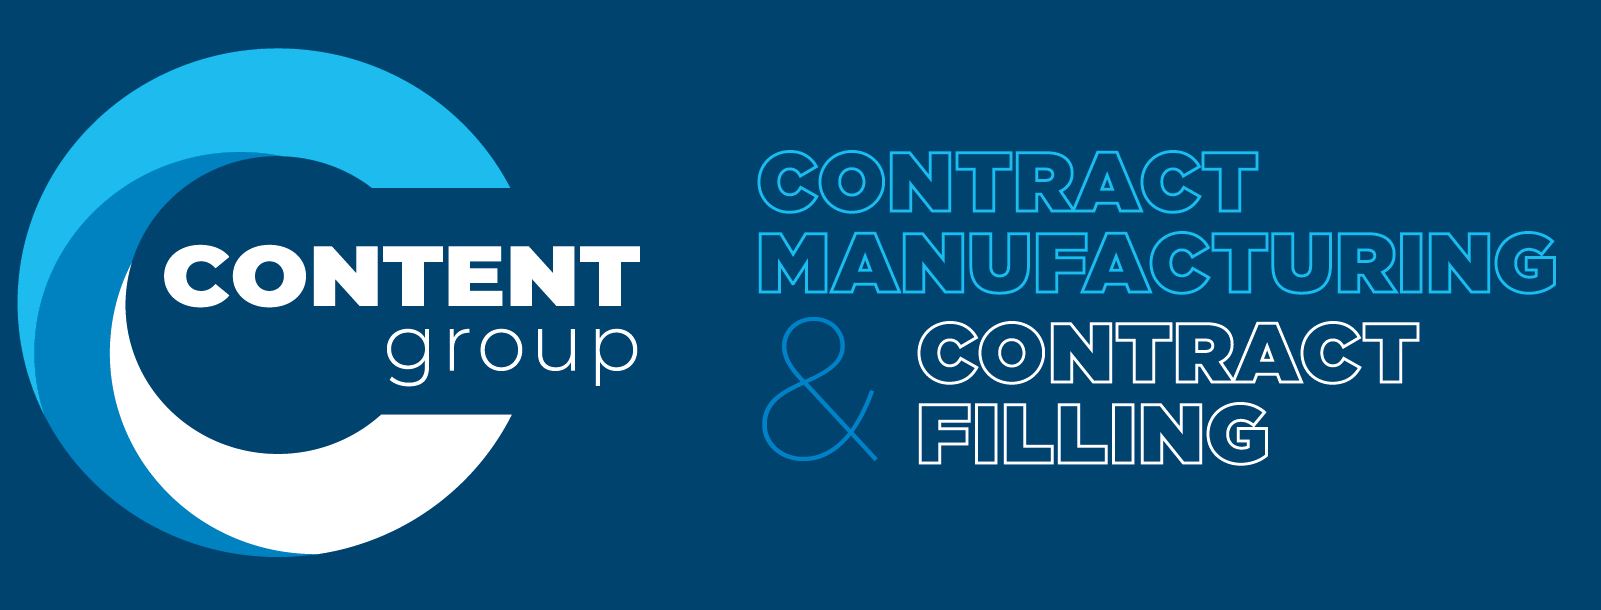 Contract manufacturing and contract filling services